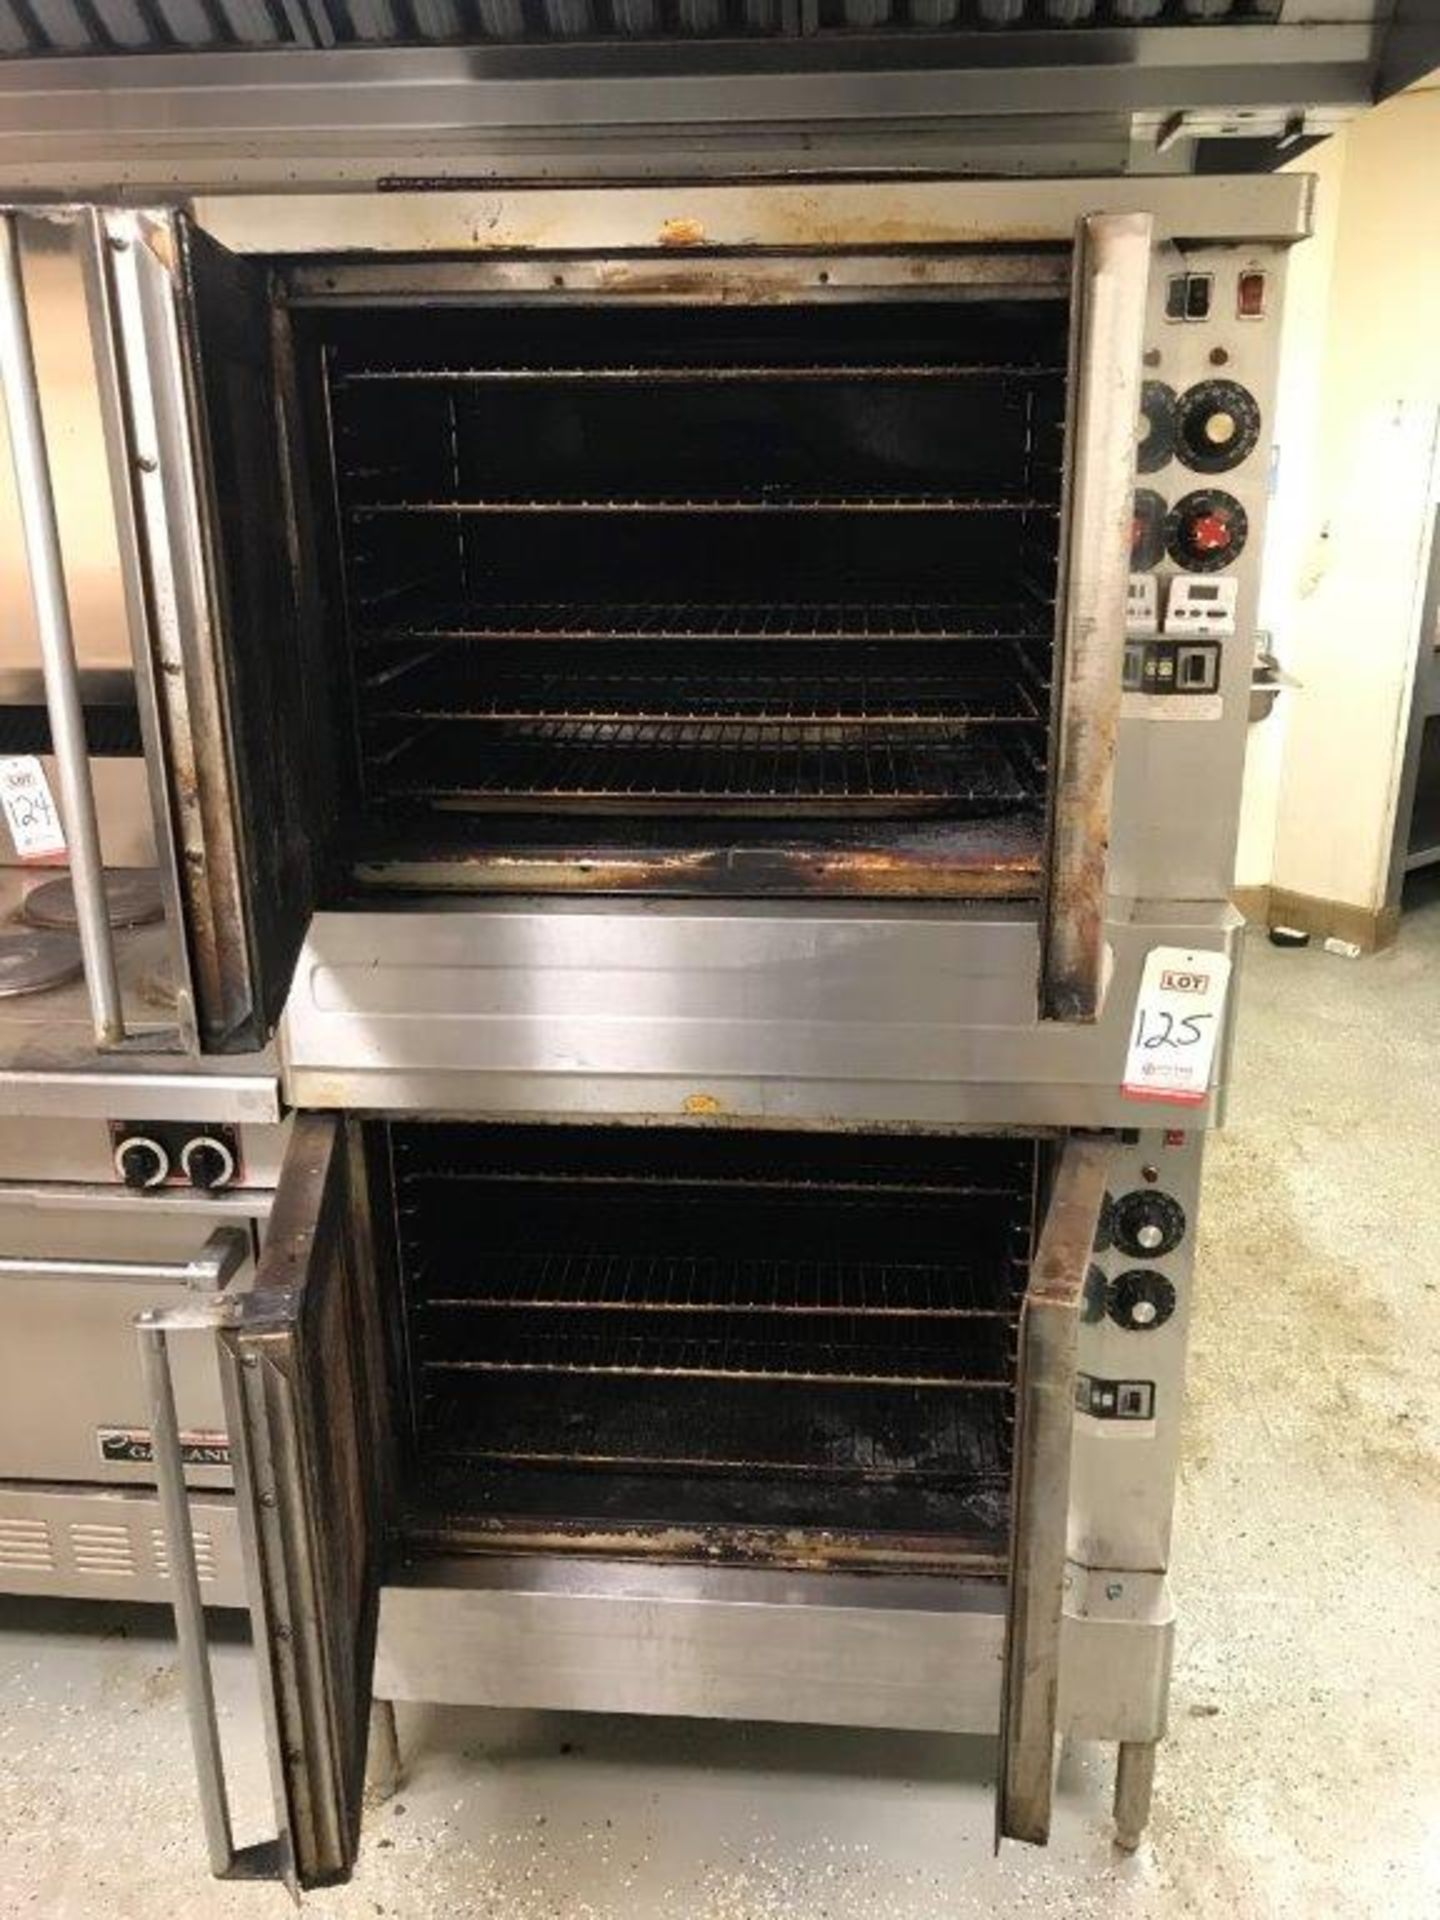 BLODGETT ELECTRIC DOUBLE OVEN, 500 DEGREE MAX TEMP, (2) 29" X 24" 2-DOOR OVEN COMPARTMENTS - Image 2 of 2